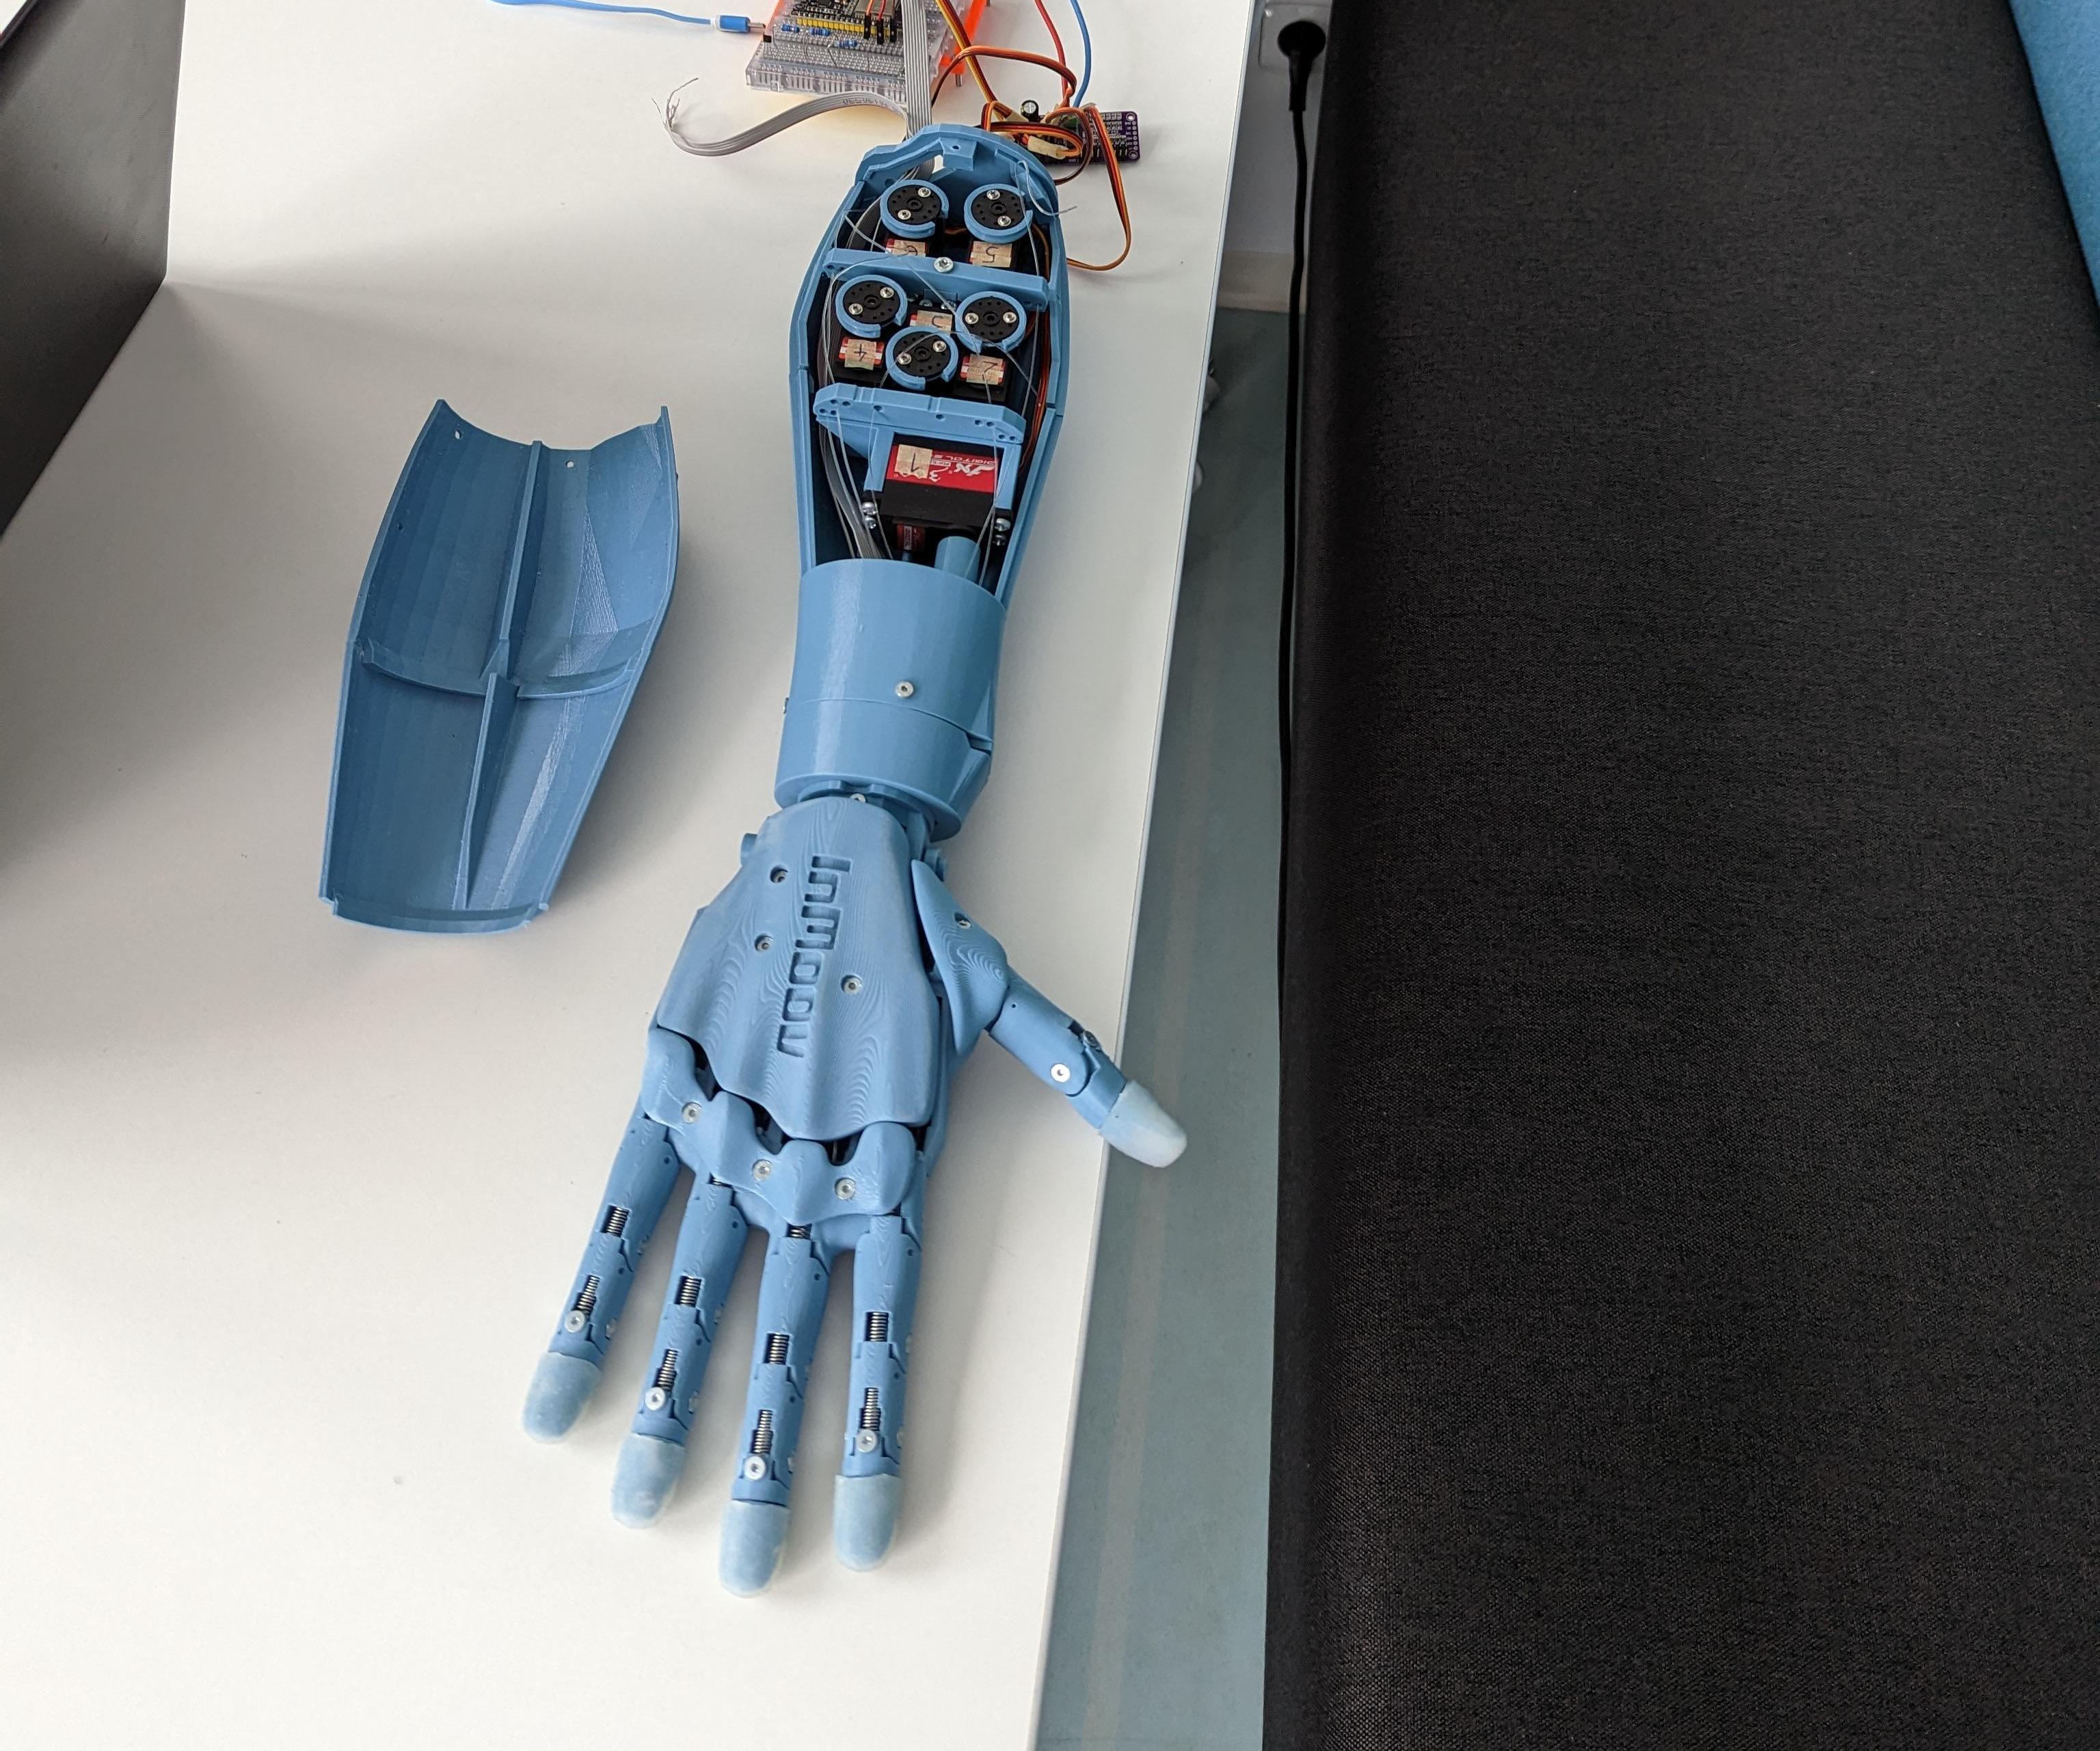 Bionic Hand Controlled by OpenCV